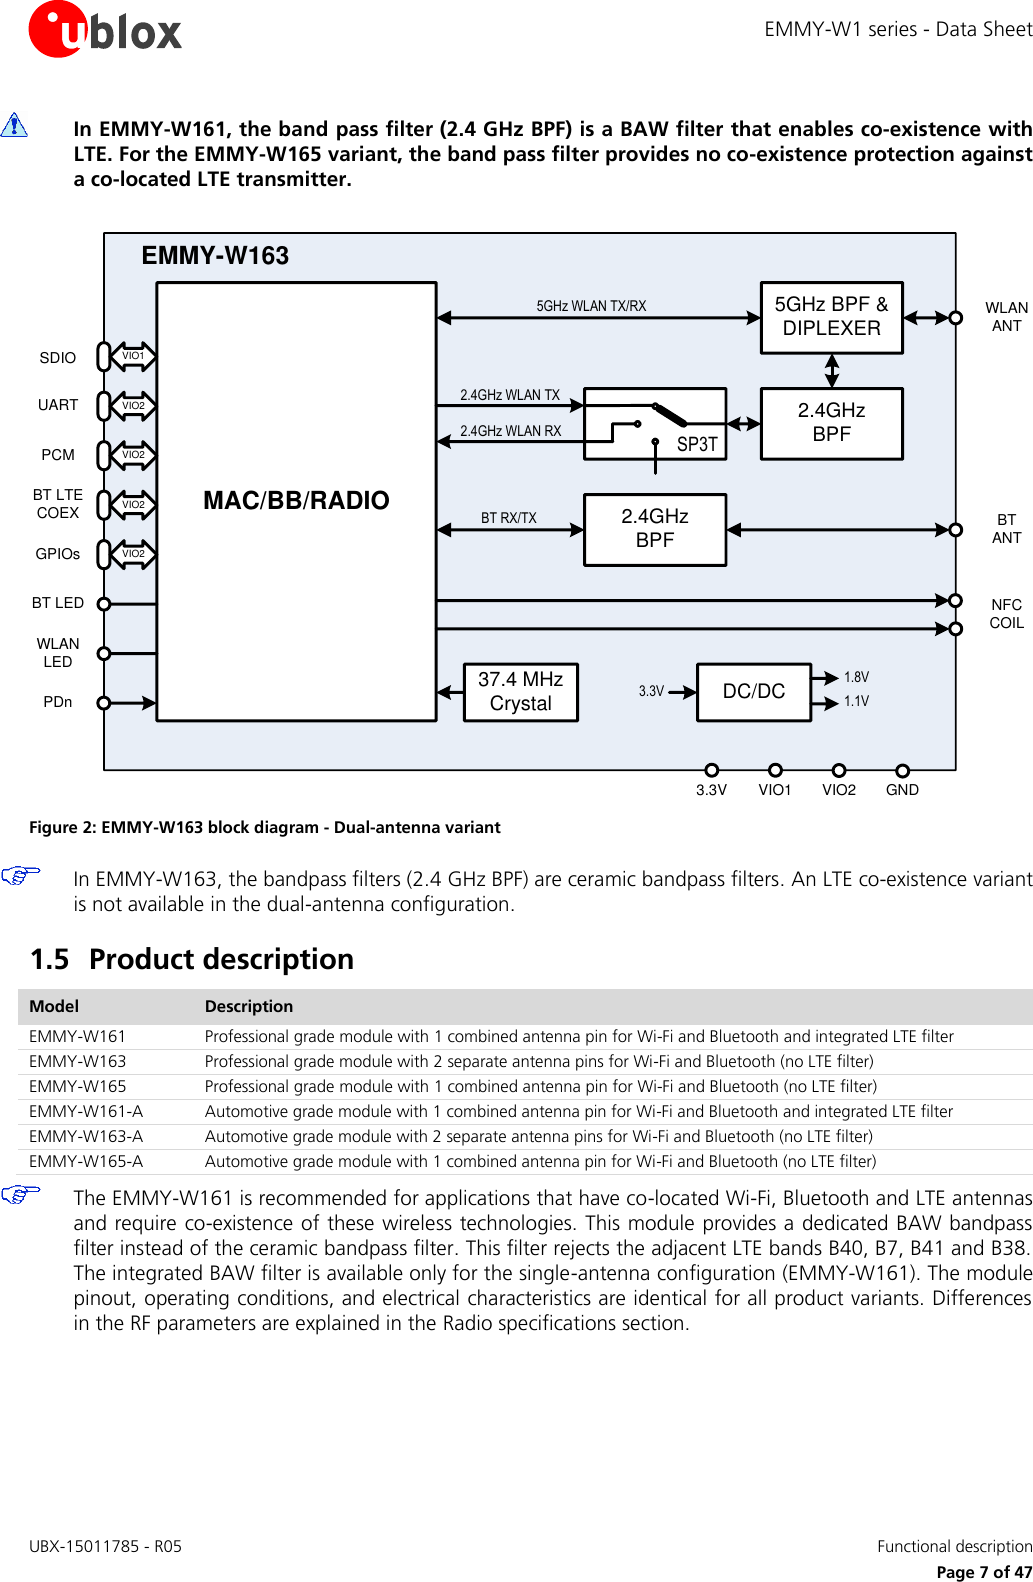 EMMY-W1 series - Data Sheet UBX-15011785 - R05   Functional description     Page 7 of 47  In EMMY-W161, the band pass filter (2.4 GHz BPF) is a BAW filter that enables co-existence with LTE. For the EMMY-W165 variant, the band pass filter provides no co-existence protection against a co-located LTE transmitter.   Figure 2: EMMY-W163 block diagram - Dual-antenna variant  In EMMY-W163, the bandpass filters (2.4 GHz BPF) are ceramic bandpass filters. An LTE co-existence variant is not available in the dual-antenna configuration. 1.5 Product description Model Description EMMY-W161 Professional grade module with 1 combined antenna pin for Wi-Fi and Bluetooth and integrated LTE filter EMMY-W163 Professional grade module with 2 separate antenna pins for Wi-Fi and Bluetooth (no LTE filter)  EMMY-W165 Professional grade module with 1 combined antenna pin for Wi-Fi and Bluetooth (no LTE filter)  EMMY-W161-A Automotive grade module with 1 combined antenna pin for Wi-Fi and Bluetooth and integrated LTE filter EMMY-W163-A Automotive grade module with 2 separate antenna pins for Wi-Fi and Bluetooth (no LTE filter) EMMY-W165-A Automotive grade module with 1 combined antenna pin for Wi-Fi and Bluetooth (no LTE filter)  The EMMY-W161 is recommended for applications that have co-located Wi-Fi, Bluetooth and LTE antennas and require co-existence of these wireless technologies. This module provides a dedicated BAW bandpass filter instead of the ceramic bandpass filter. This filter rejects the adjacent LTE bands B40, B7, B41 and B38. The integrated BAW filter is available only for the single-antenna configuration (EMMY-W161). The module pinout, operating conditions, and electrical characteristics are identical for all product variants. Differences in the RF parameters are explained in the Radio specifications section.  MAC/BB/RADIO2.4GHz WLAN TX2.4GHz WLAN RXBT RX/TXWLANANT5GHz WLAN TX/RX 5GHz BPF &amp;DIPLEXER2.4GHzBPFEMMY-W163SDIO37.4 MHzCrystalVIO1UART VIO2PCM VIO2BT LTE COEX VIO2BT LEDWLAN LEDPDn2.4GHzBPFSP3T3.3V VIO1 VIO2 GNDNFCCOILBTANTVIO2GPIOsDC/DC3.3V1.8V1.1V